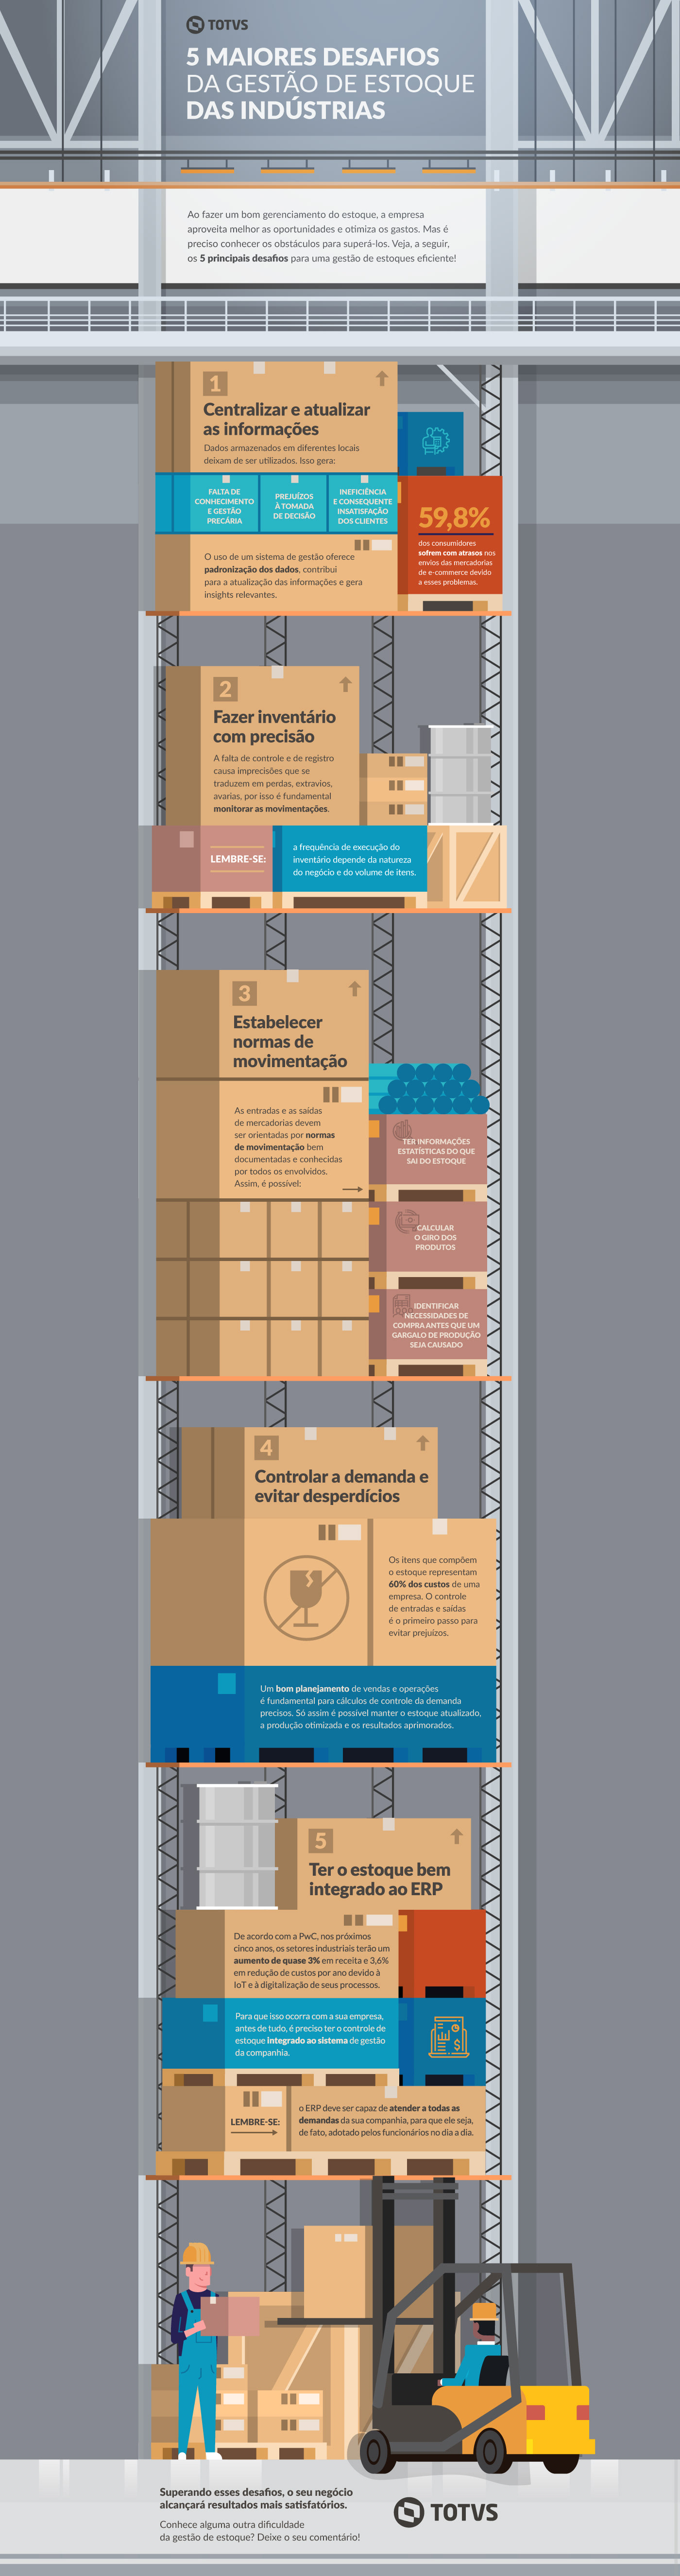 Totvs Lean infographic rock content manufacturing ERP 4.0 industria industry Blog